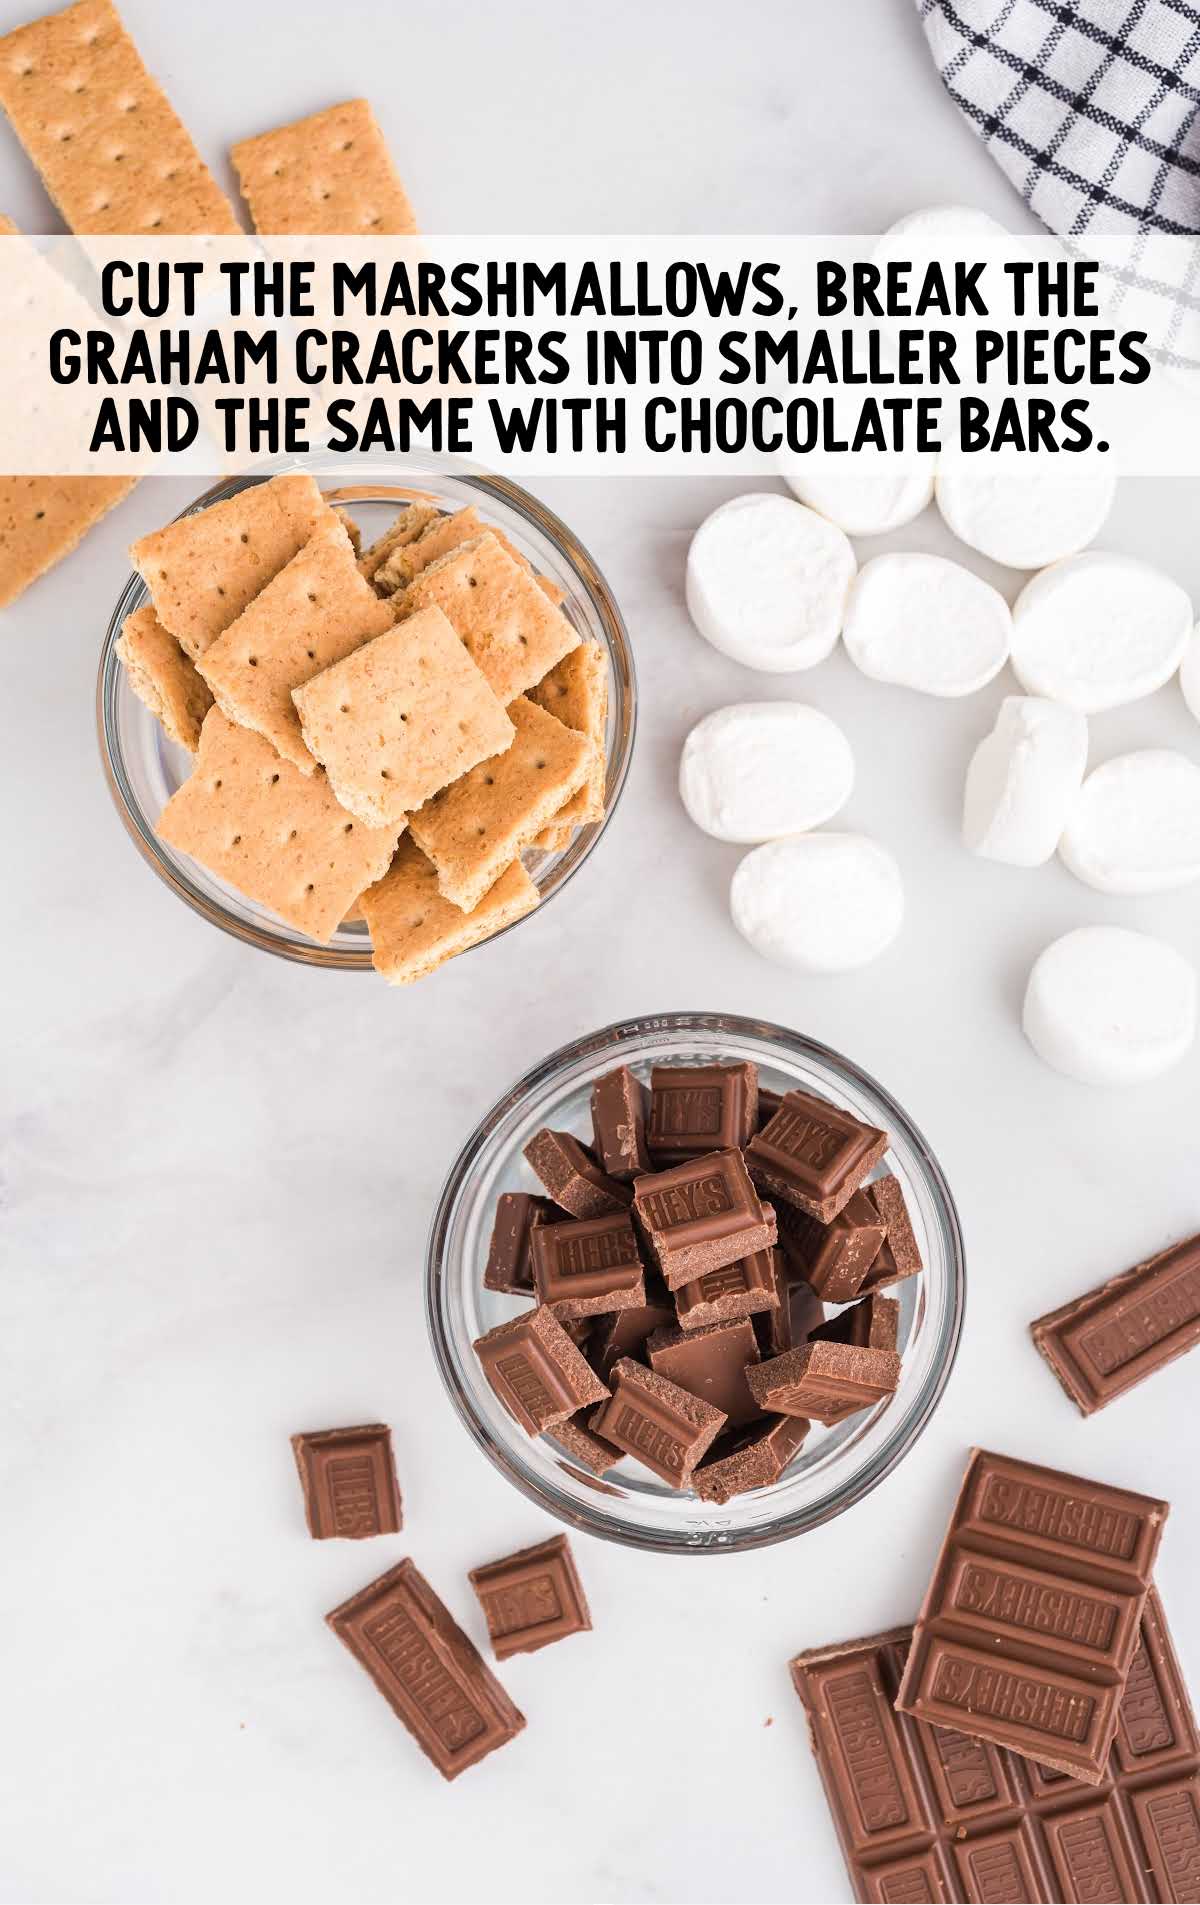 marshmallows, graham crackers and chocolate bars broken into smaller pieces